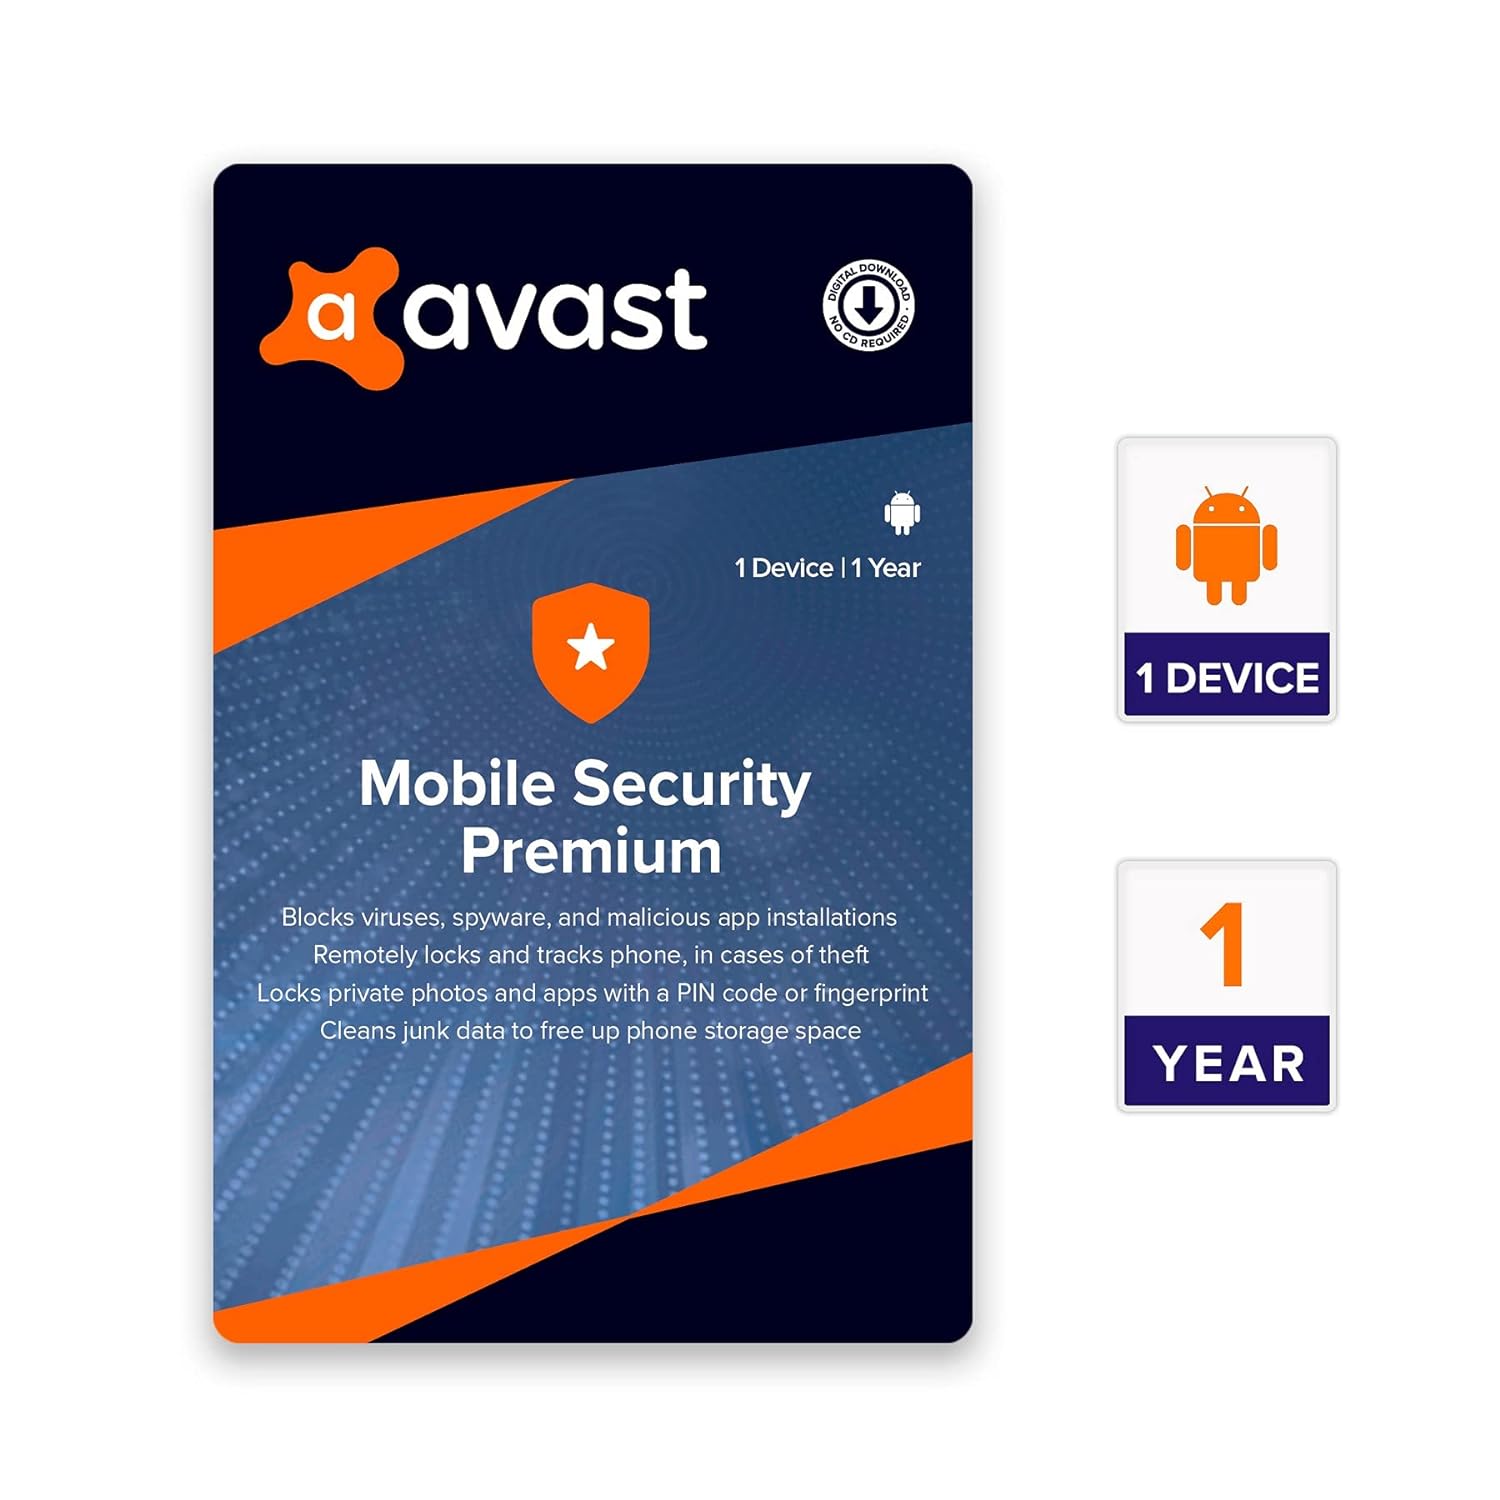 Avast Ultimate Mobile Security Premium for Android 2023 Key (1 Year / 1 Device) 7.41 $